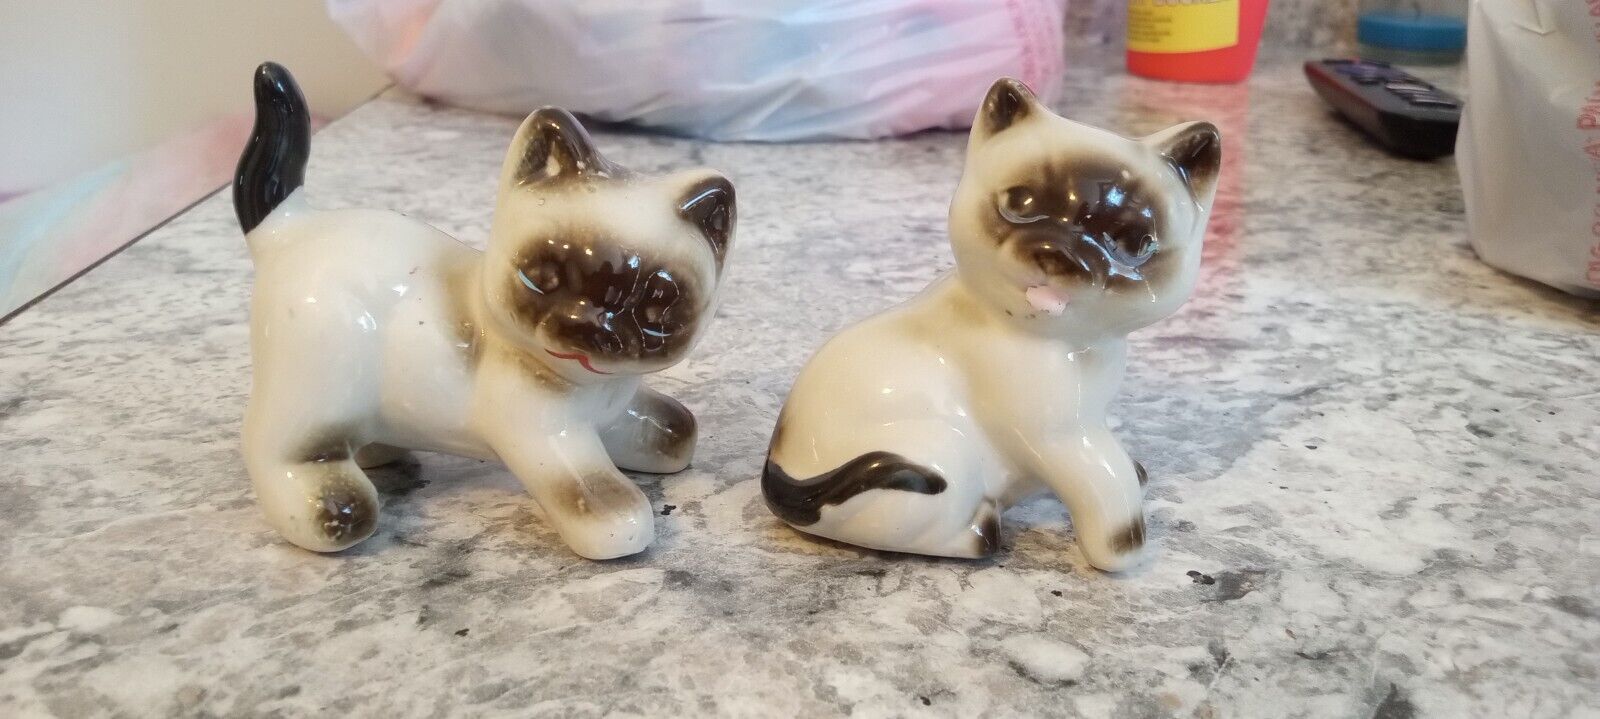 Lot of 2 Vintage Ceramic Porcelain Siamese Cat Figurines From Japan & China